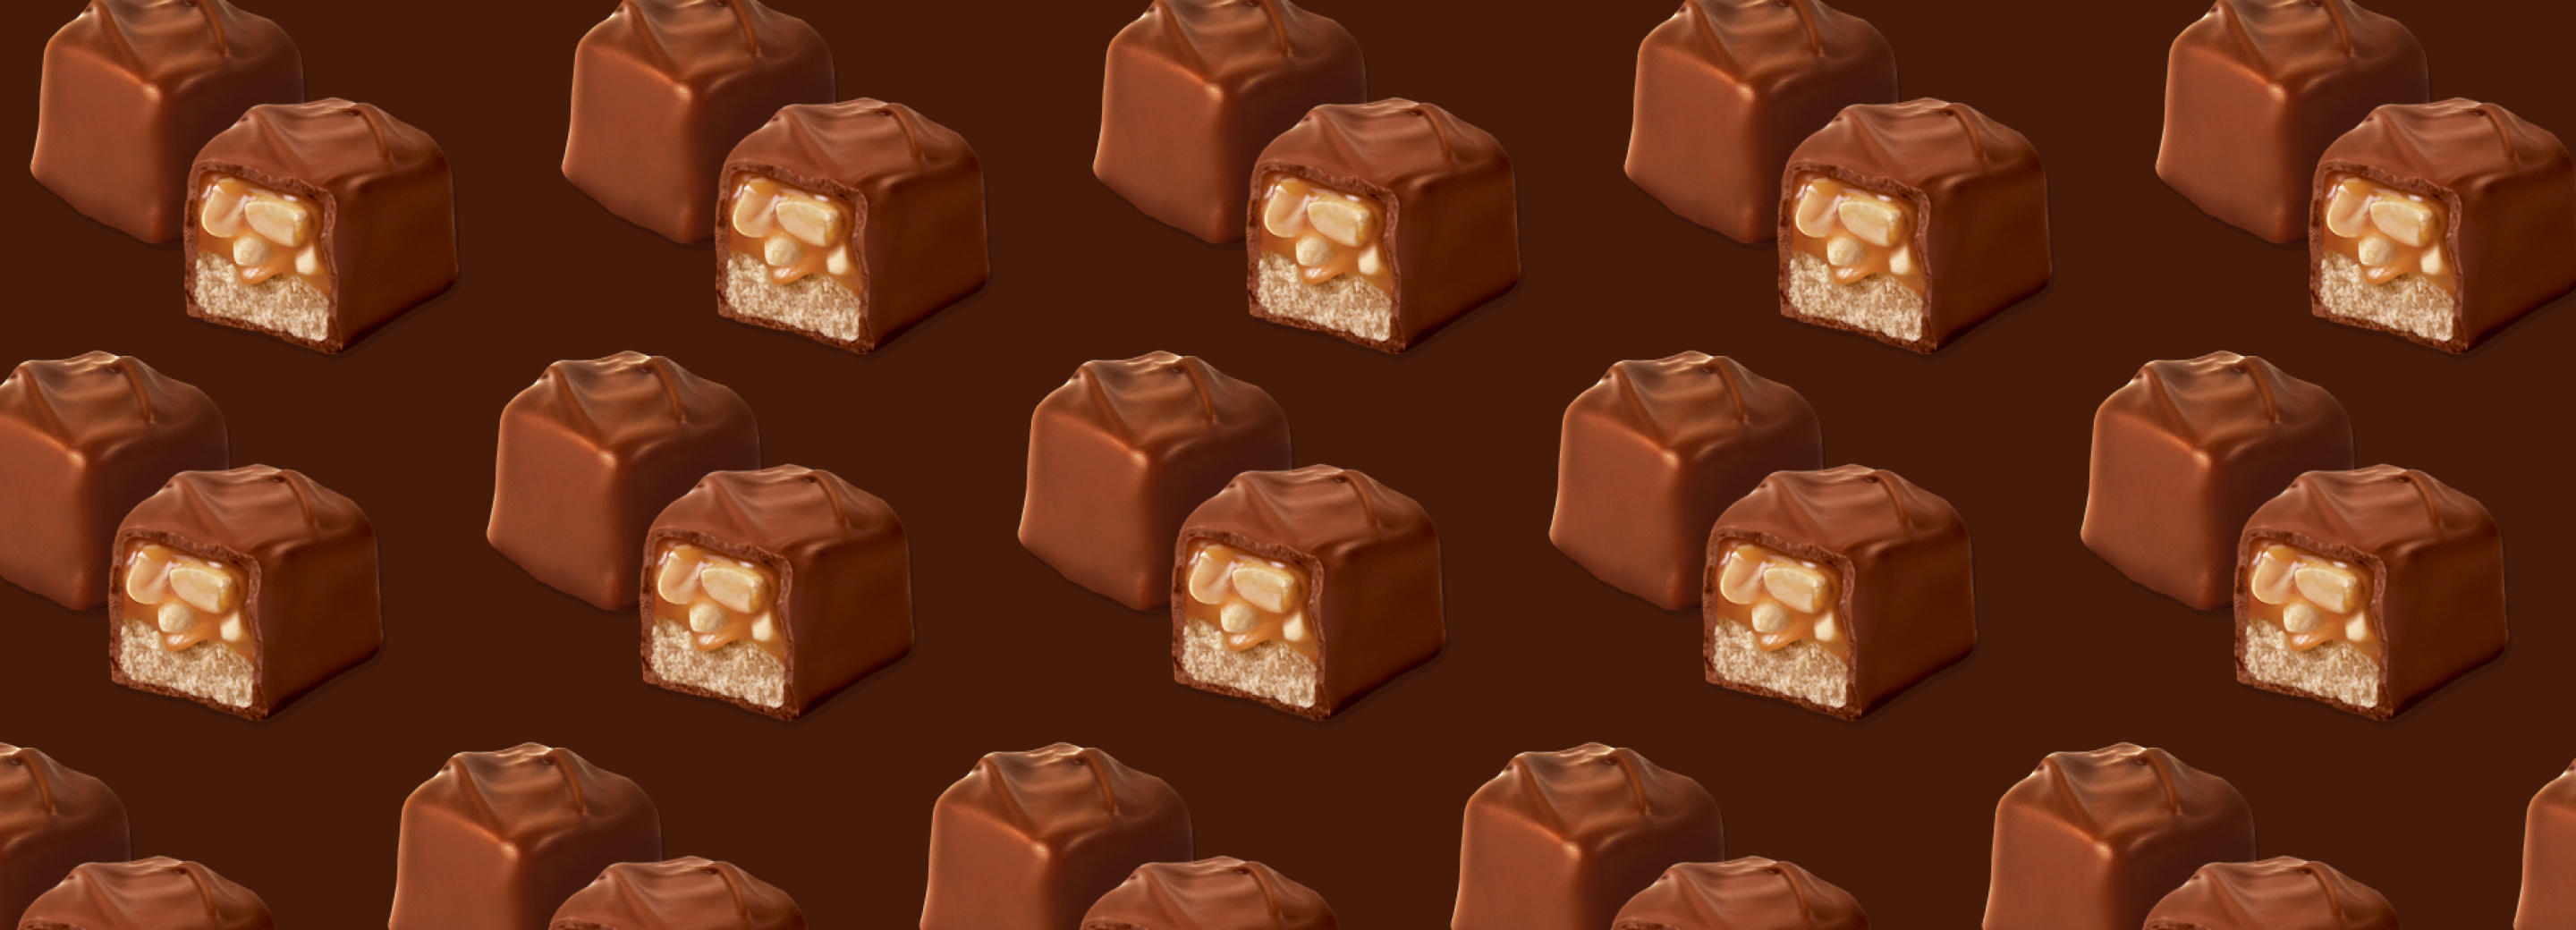 Pattern of mini snickers bars over a brown background